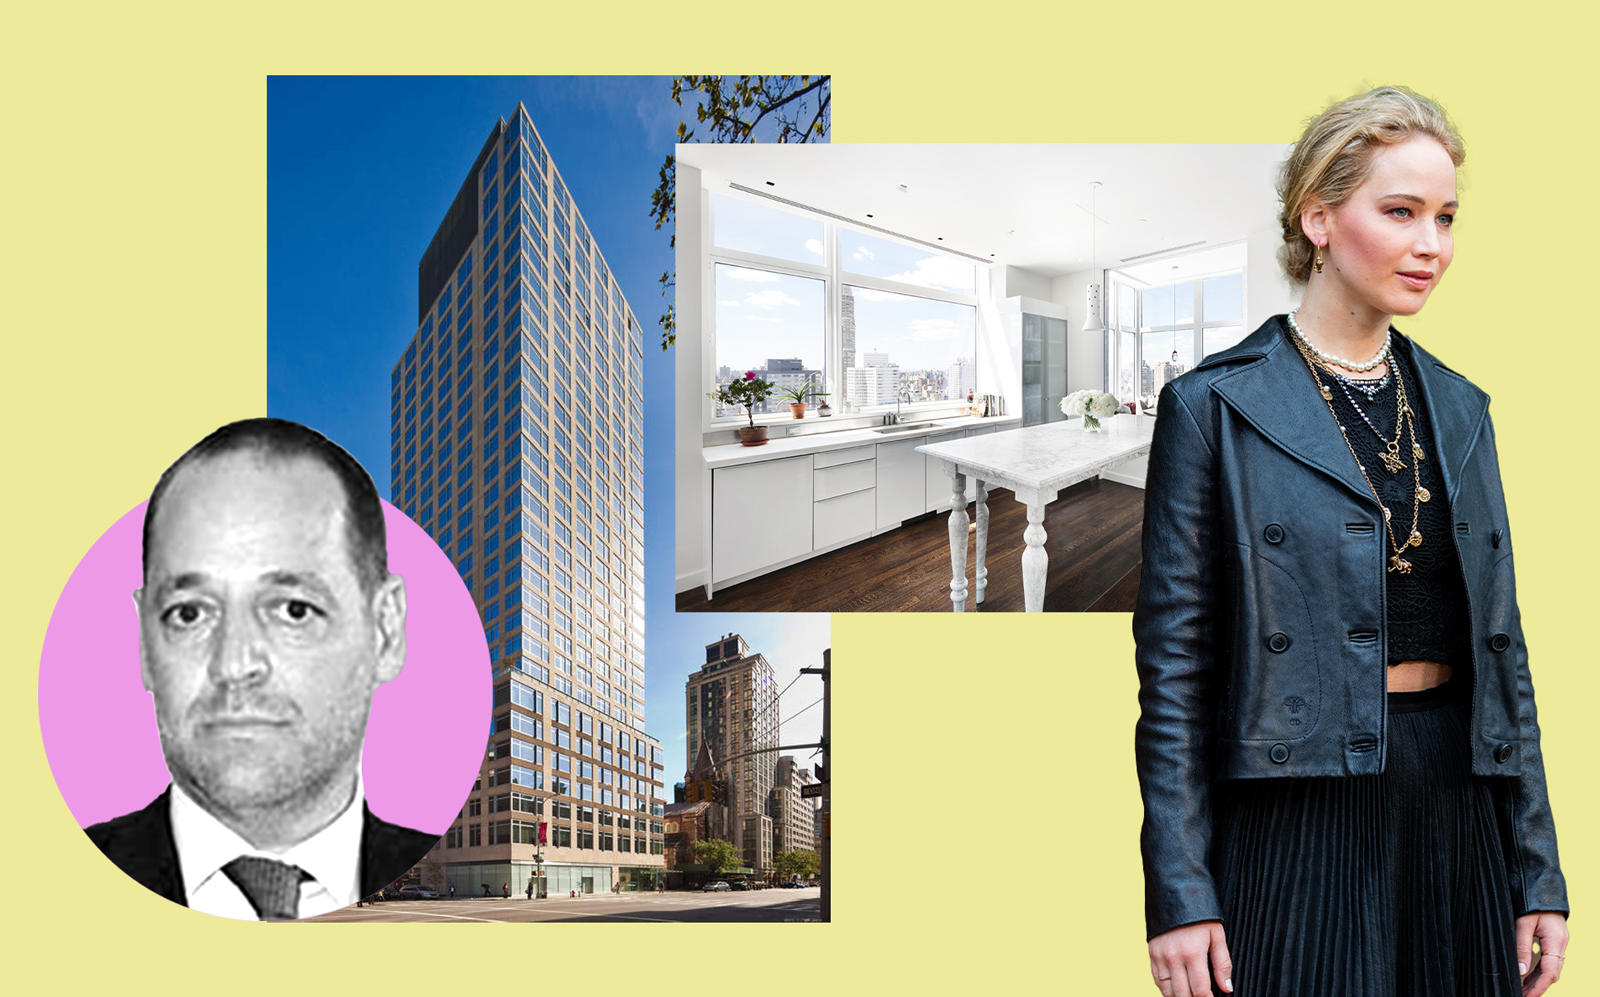 Marwan Kheireddine (inset), Jennifer Lawrence and 400 East 67th Street (Getty, Compass, BDL Accelerate)